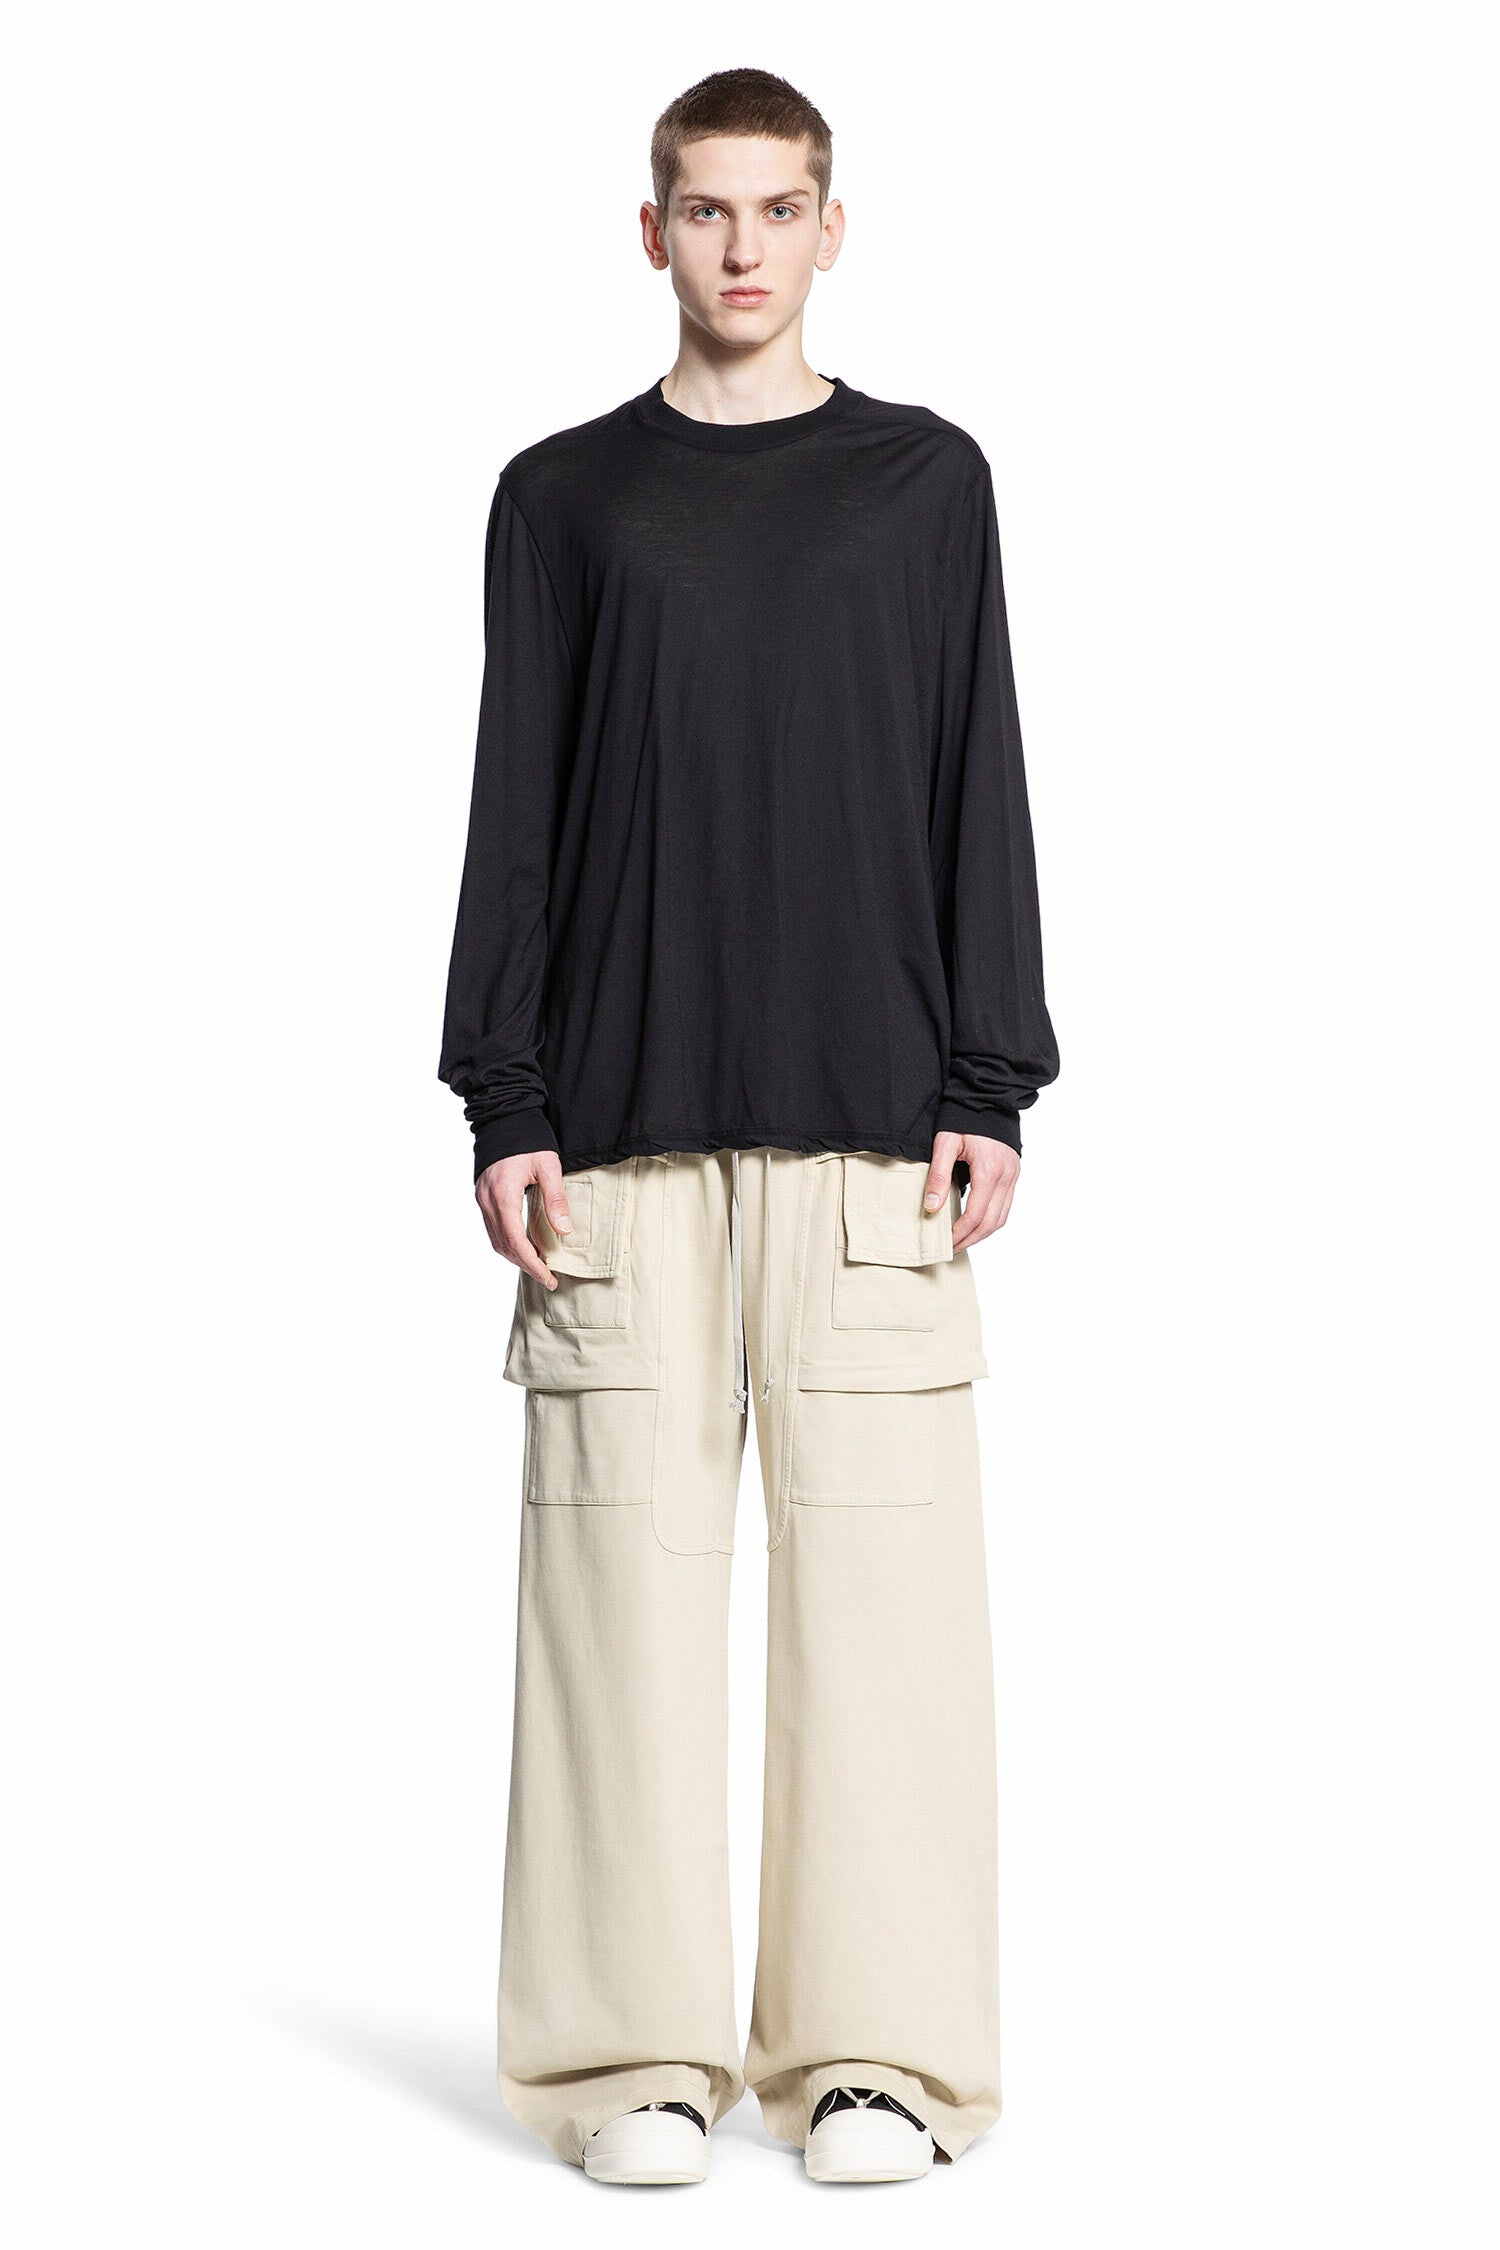 RICK OWENS DRKSHDW MAN OFF-WHITE TROUSERS